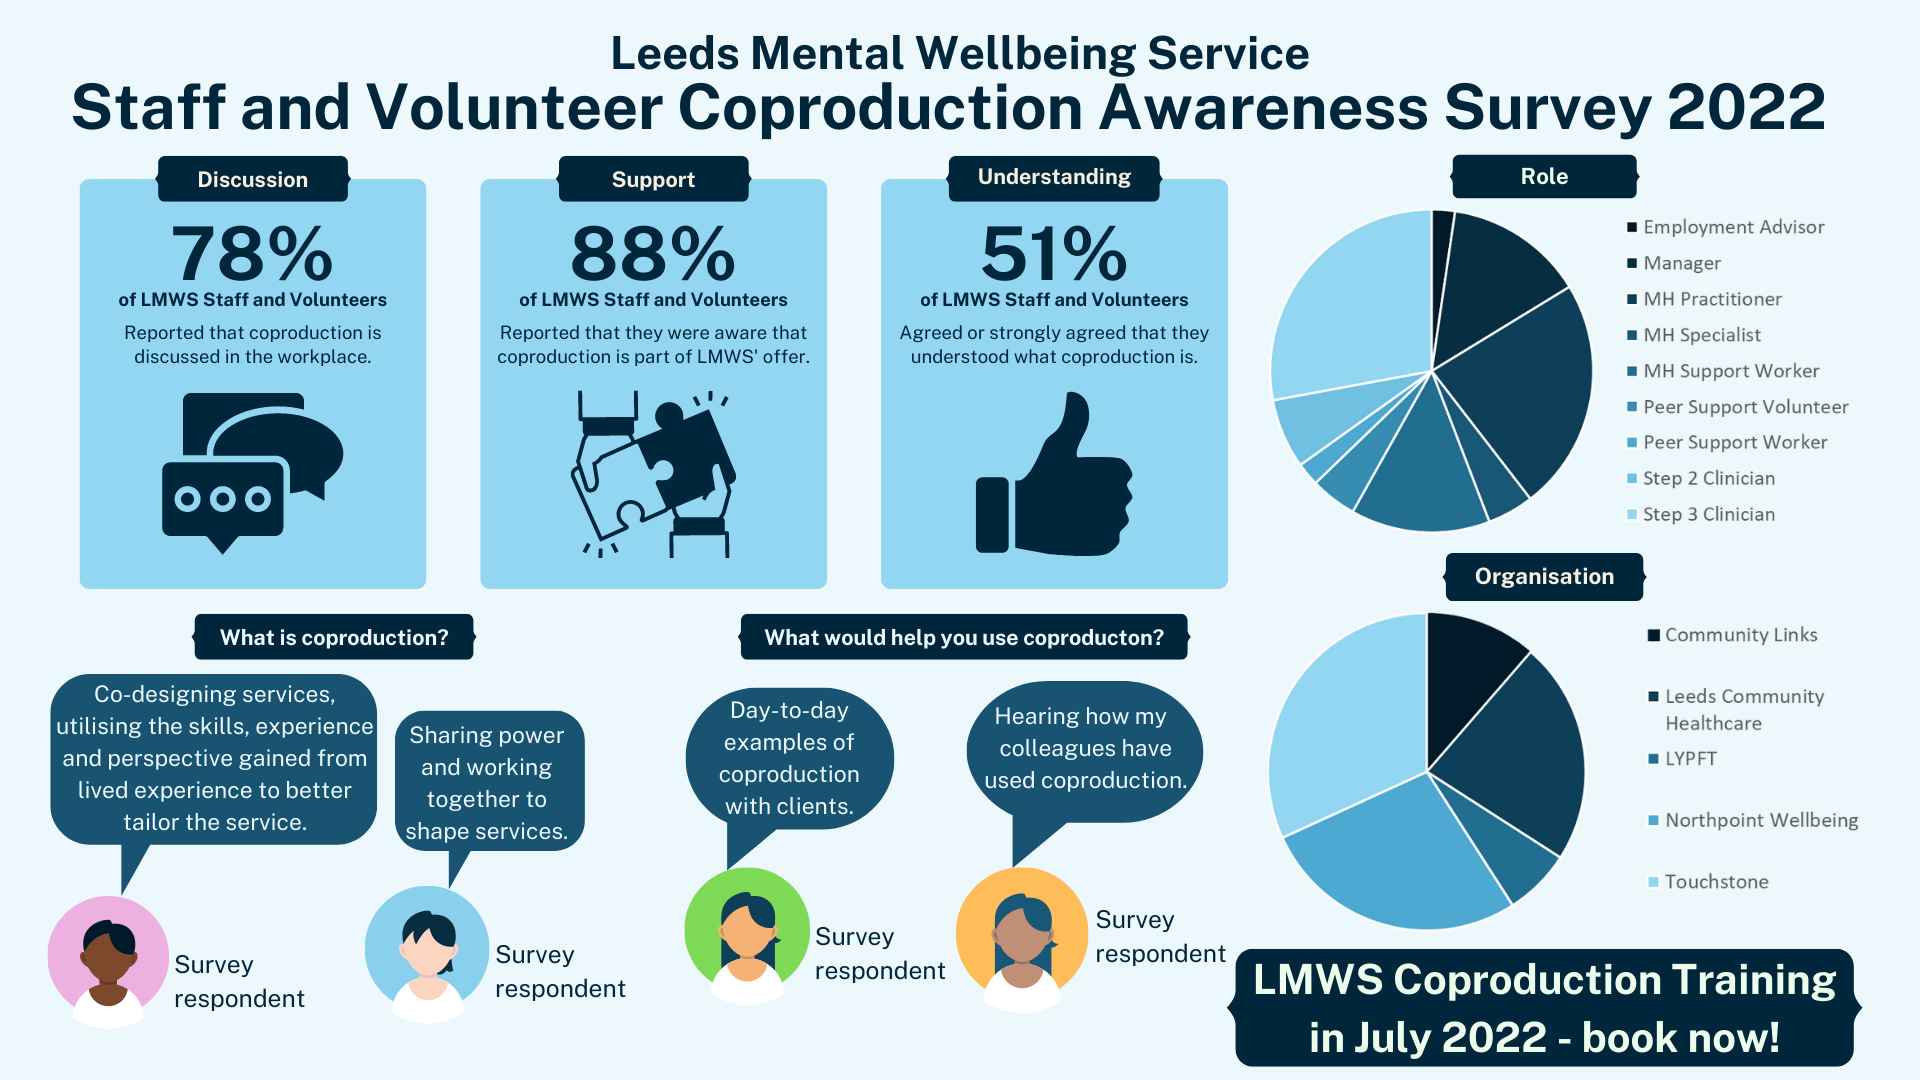 The image is an infographic showing the results to the Coproduction Awareness Survey of staff and volunteers at Leeds Mental Wellbeing Service. The image shows the key facts, taken from the survey, which also feature in text in the blog above. On the right hand side, there are also pie charts showing the breakdown of different staff's roles and which organisation they are from within the Leeds Mental Wellbeing Umbrella. The biggest proportion of staff who responded were Touchstone, followed by Northpoint Wellbeing. The most common role who responded was Step 3 clinicians. There are also some quotes from staff and volunteers in response to the questions 'what would help you use coproduction?' and 'what is coproduction?'